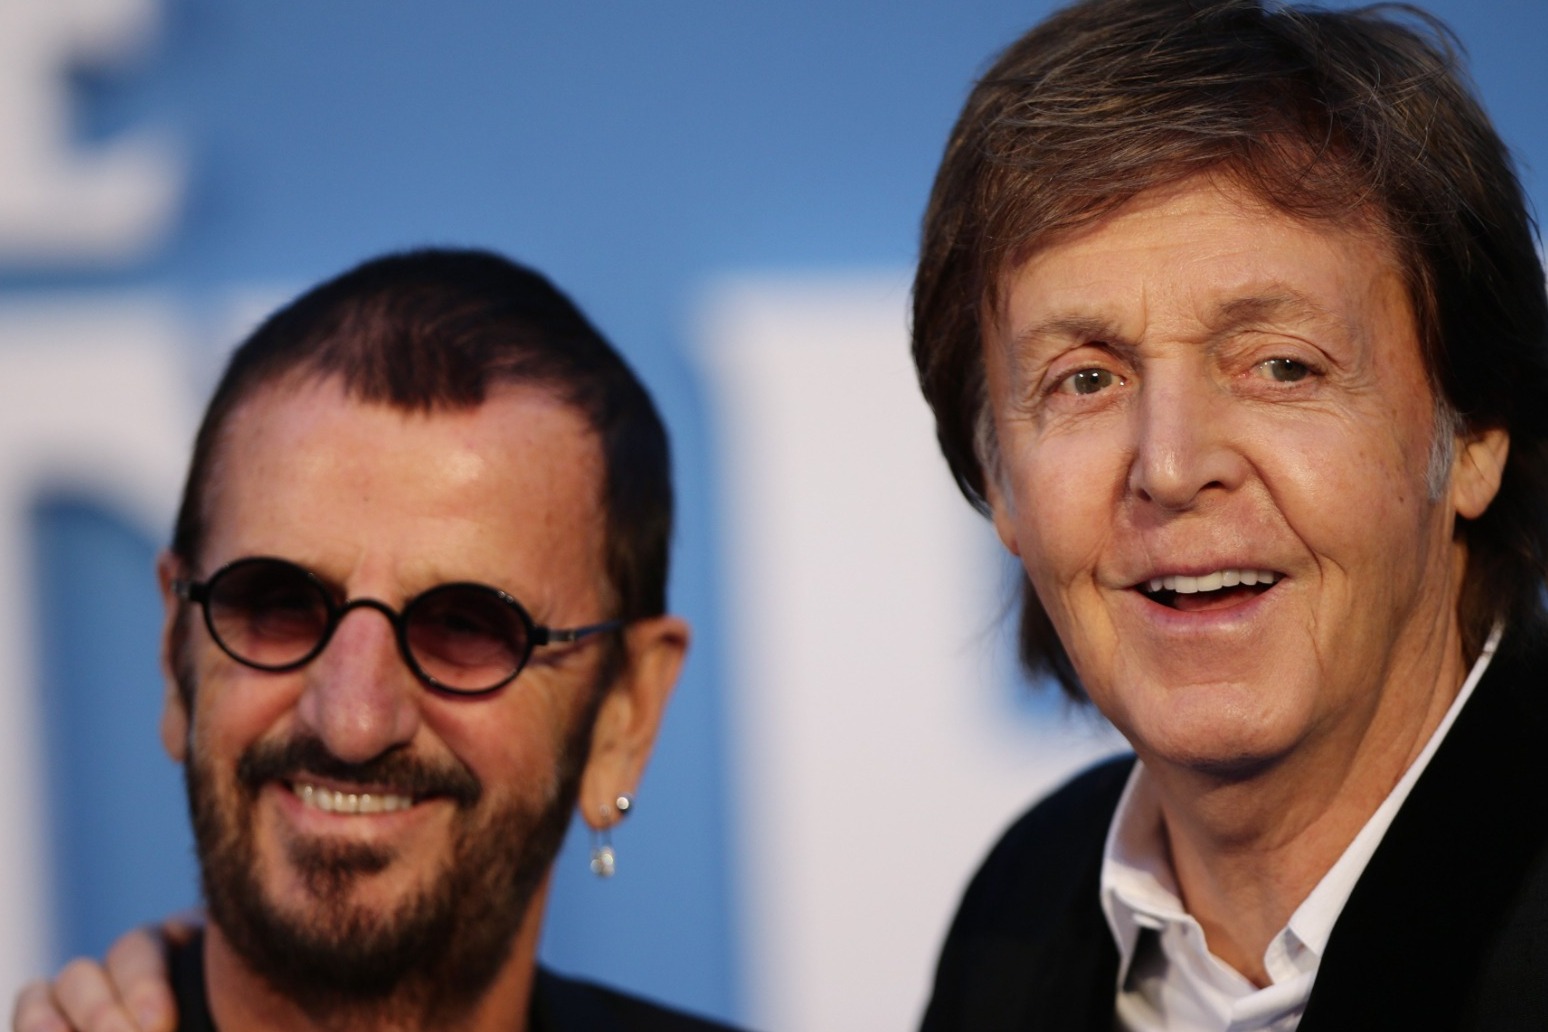 Sir Paul McCartney: It was magical to feel like I was reuniting with John Lennon 